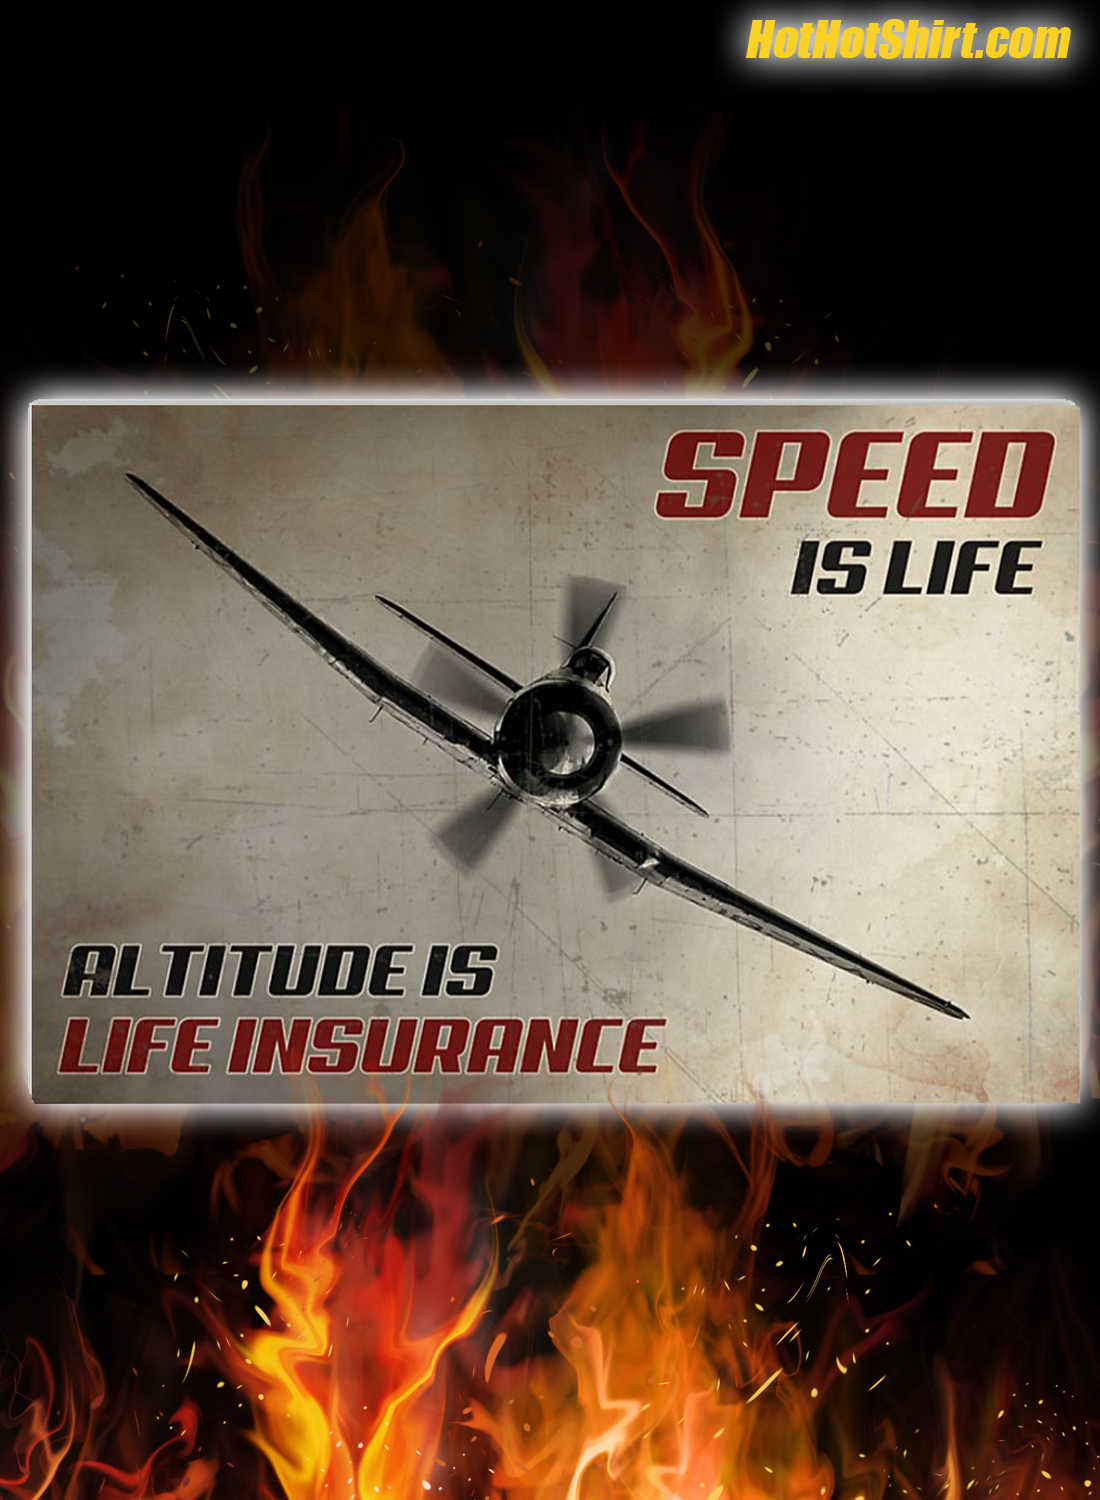 Airplane Speed is life altitude is life insurance poster